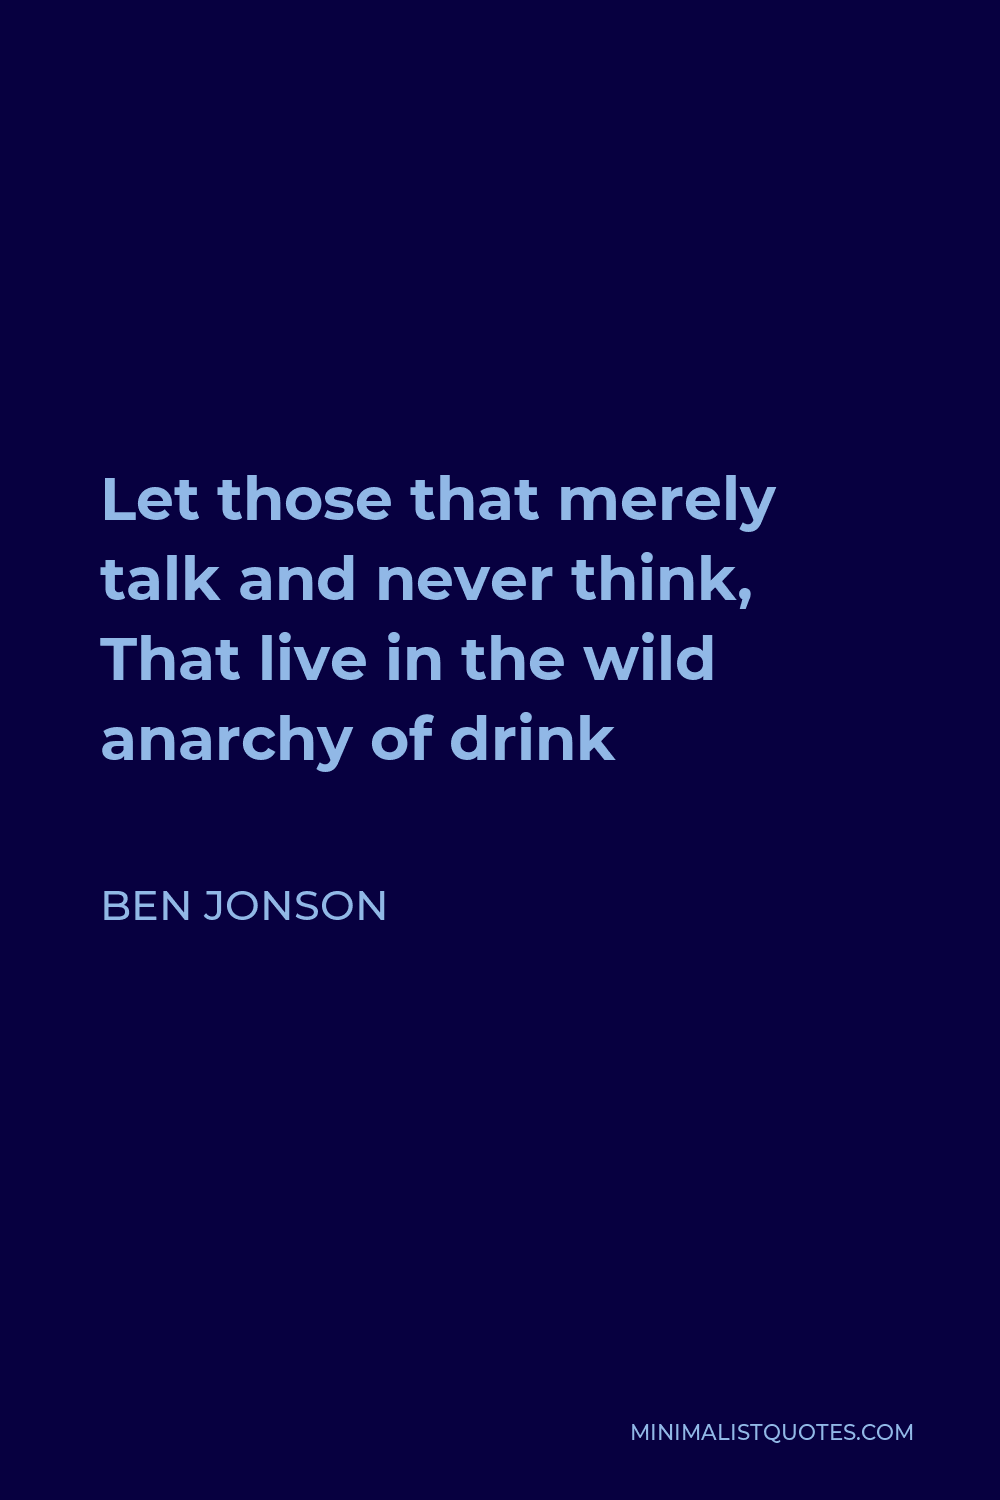 Ben Jonson Quote - Let those that merely talk and never think, That live in the wild anarchy of drink